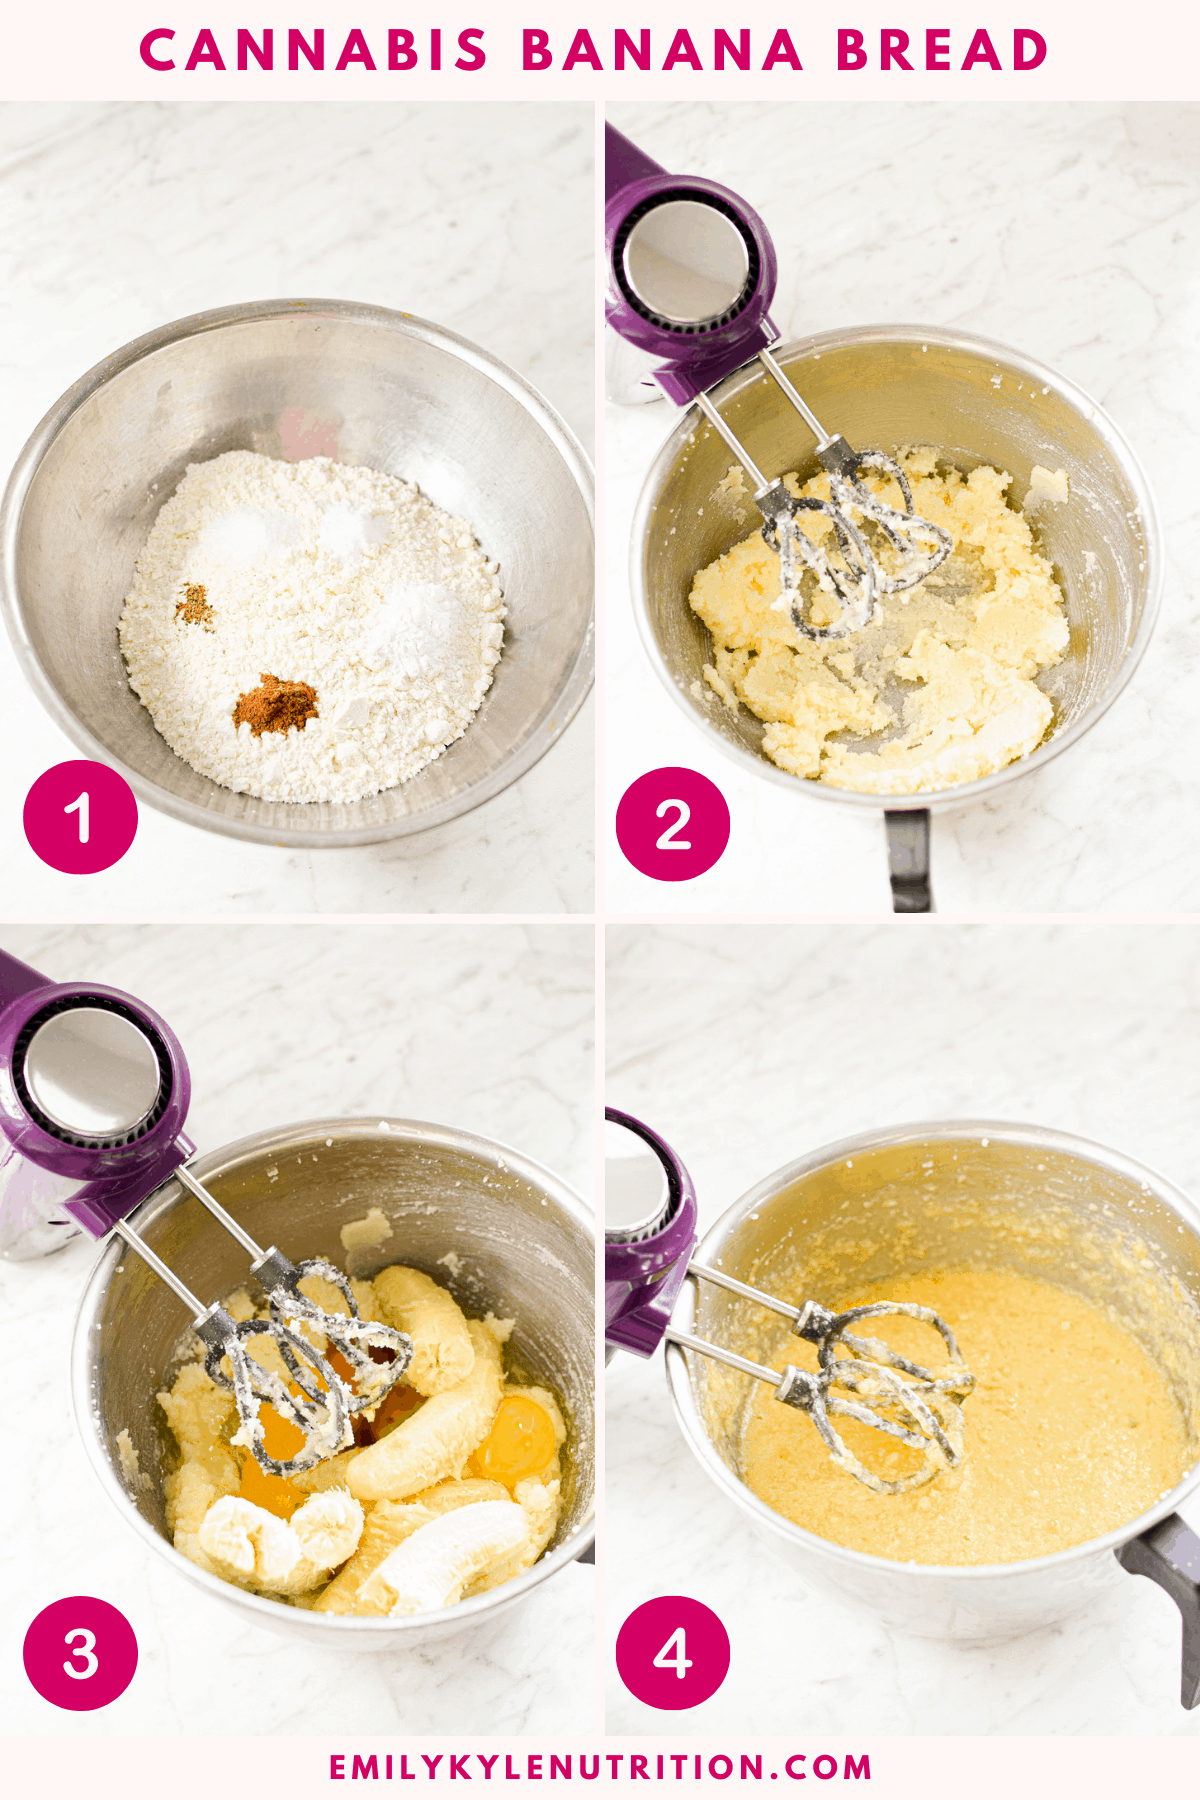 A collage of 4 images showing the first four steps in the process of making banana bread from creaming the butter and sugar to mixing them with a hand blender